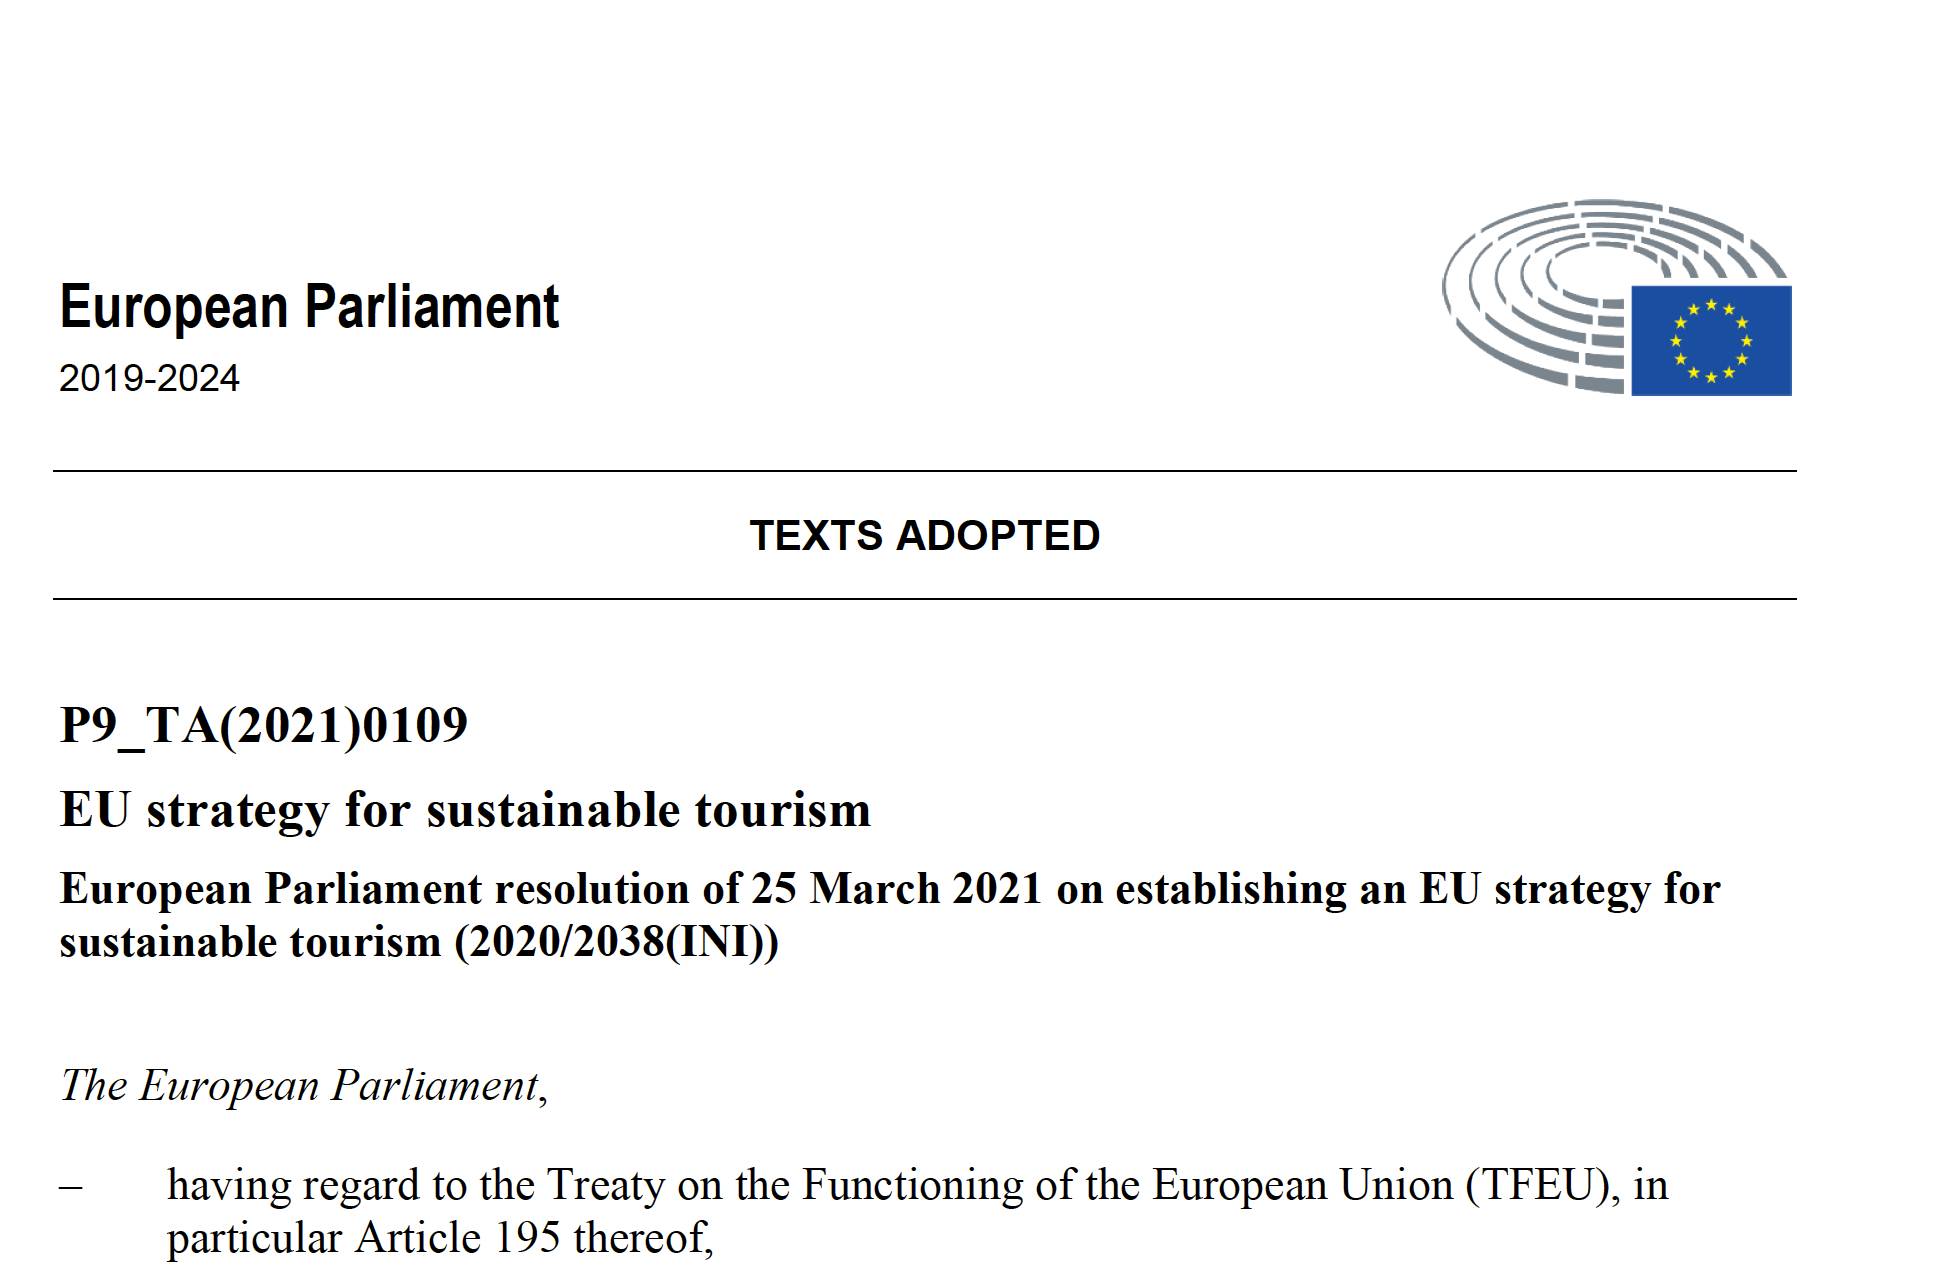 EU Strategy for Sustainable Tourism